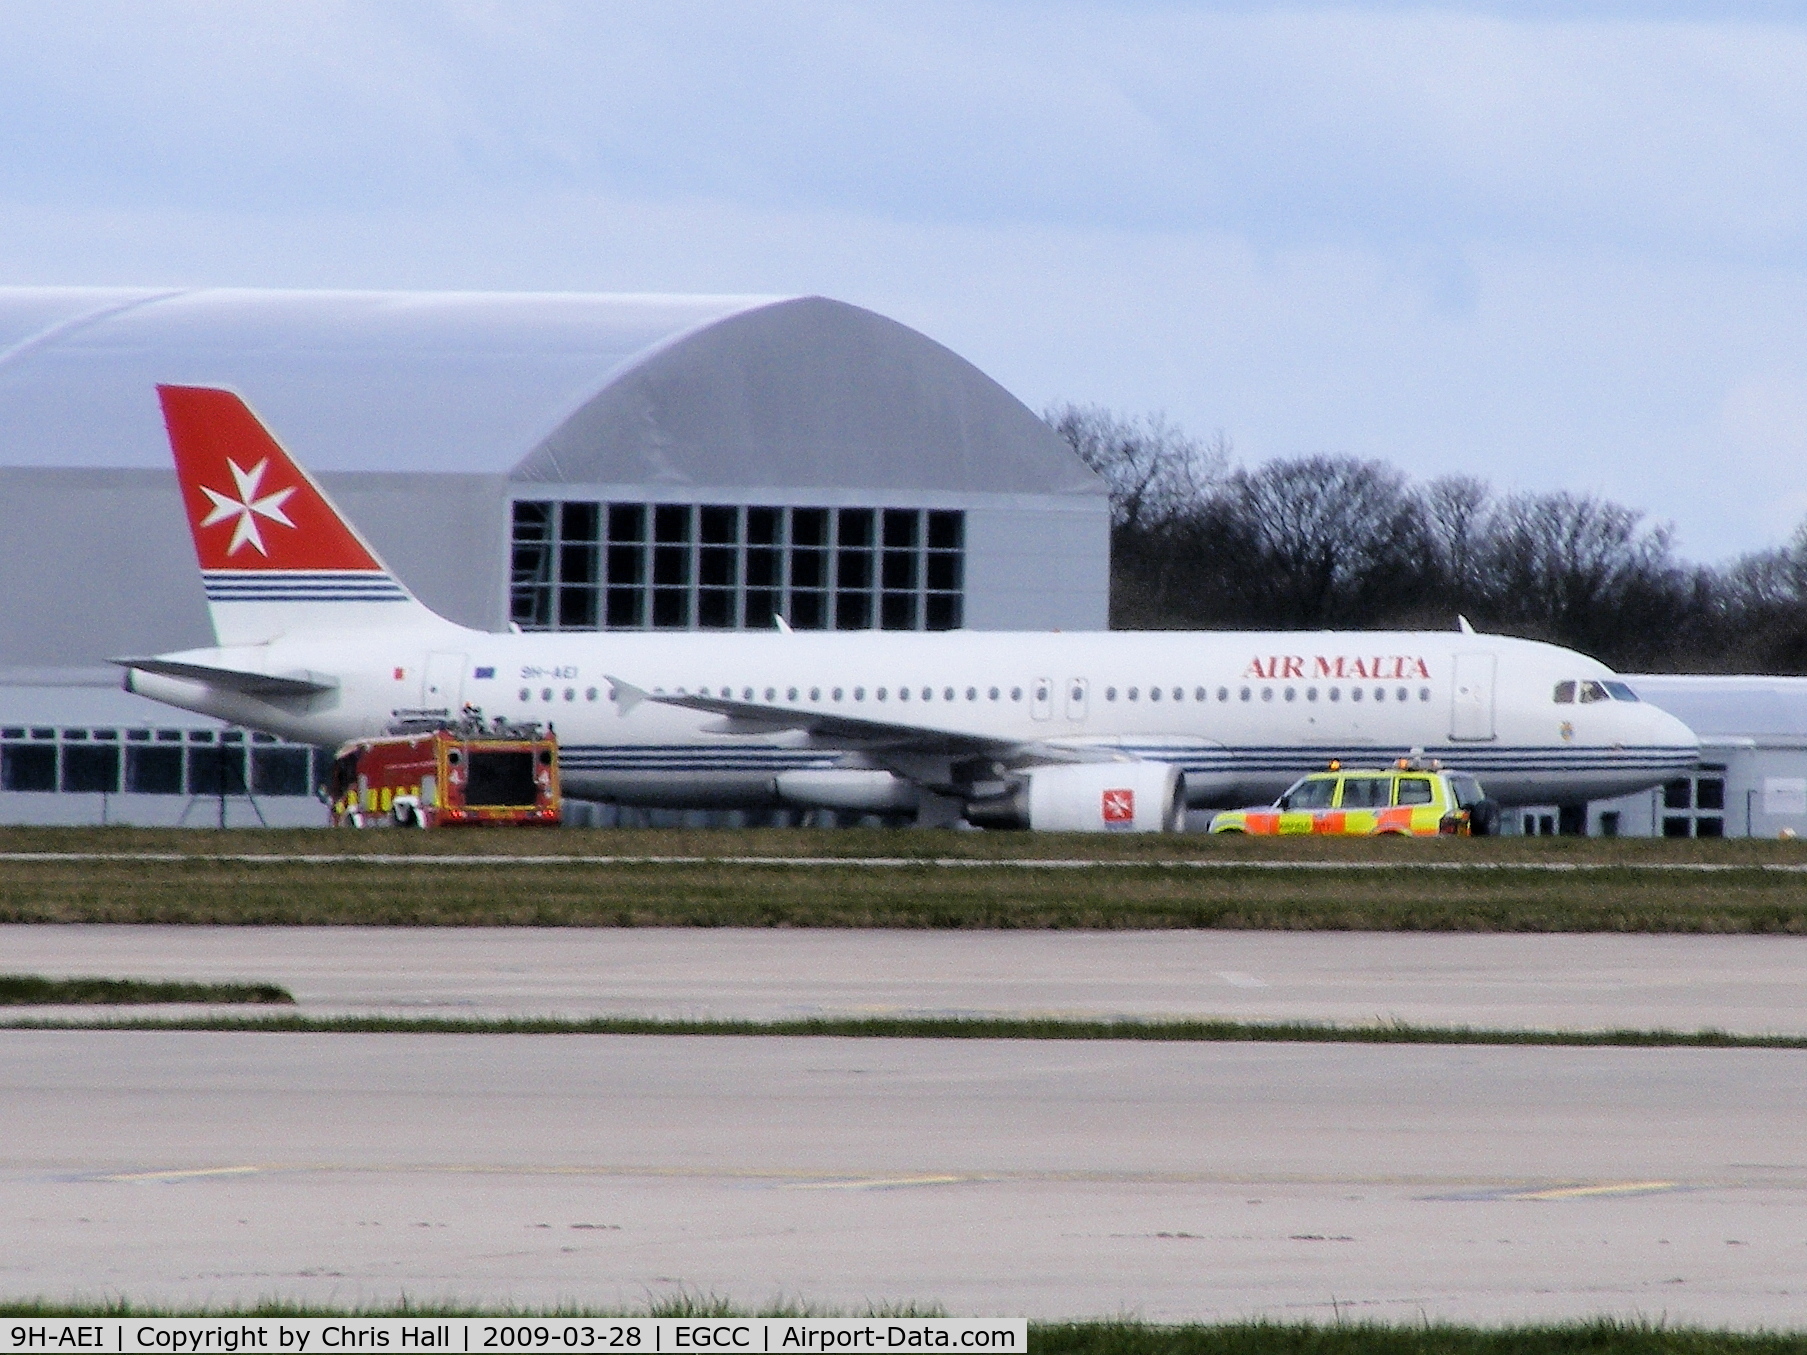 9H-AEI, 2004 Airbus A320-214 C/N 2189, Air Malta A319 9H-AEI made an emergency landing with all the fire trucks in attendance